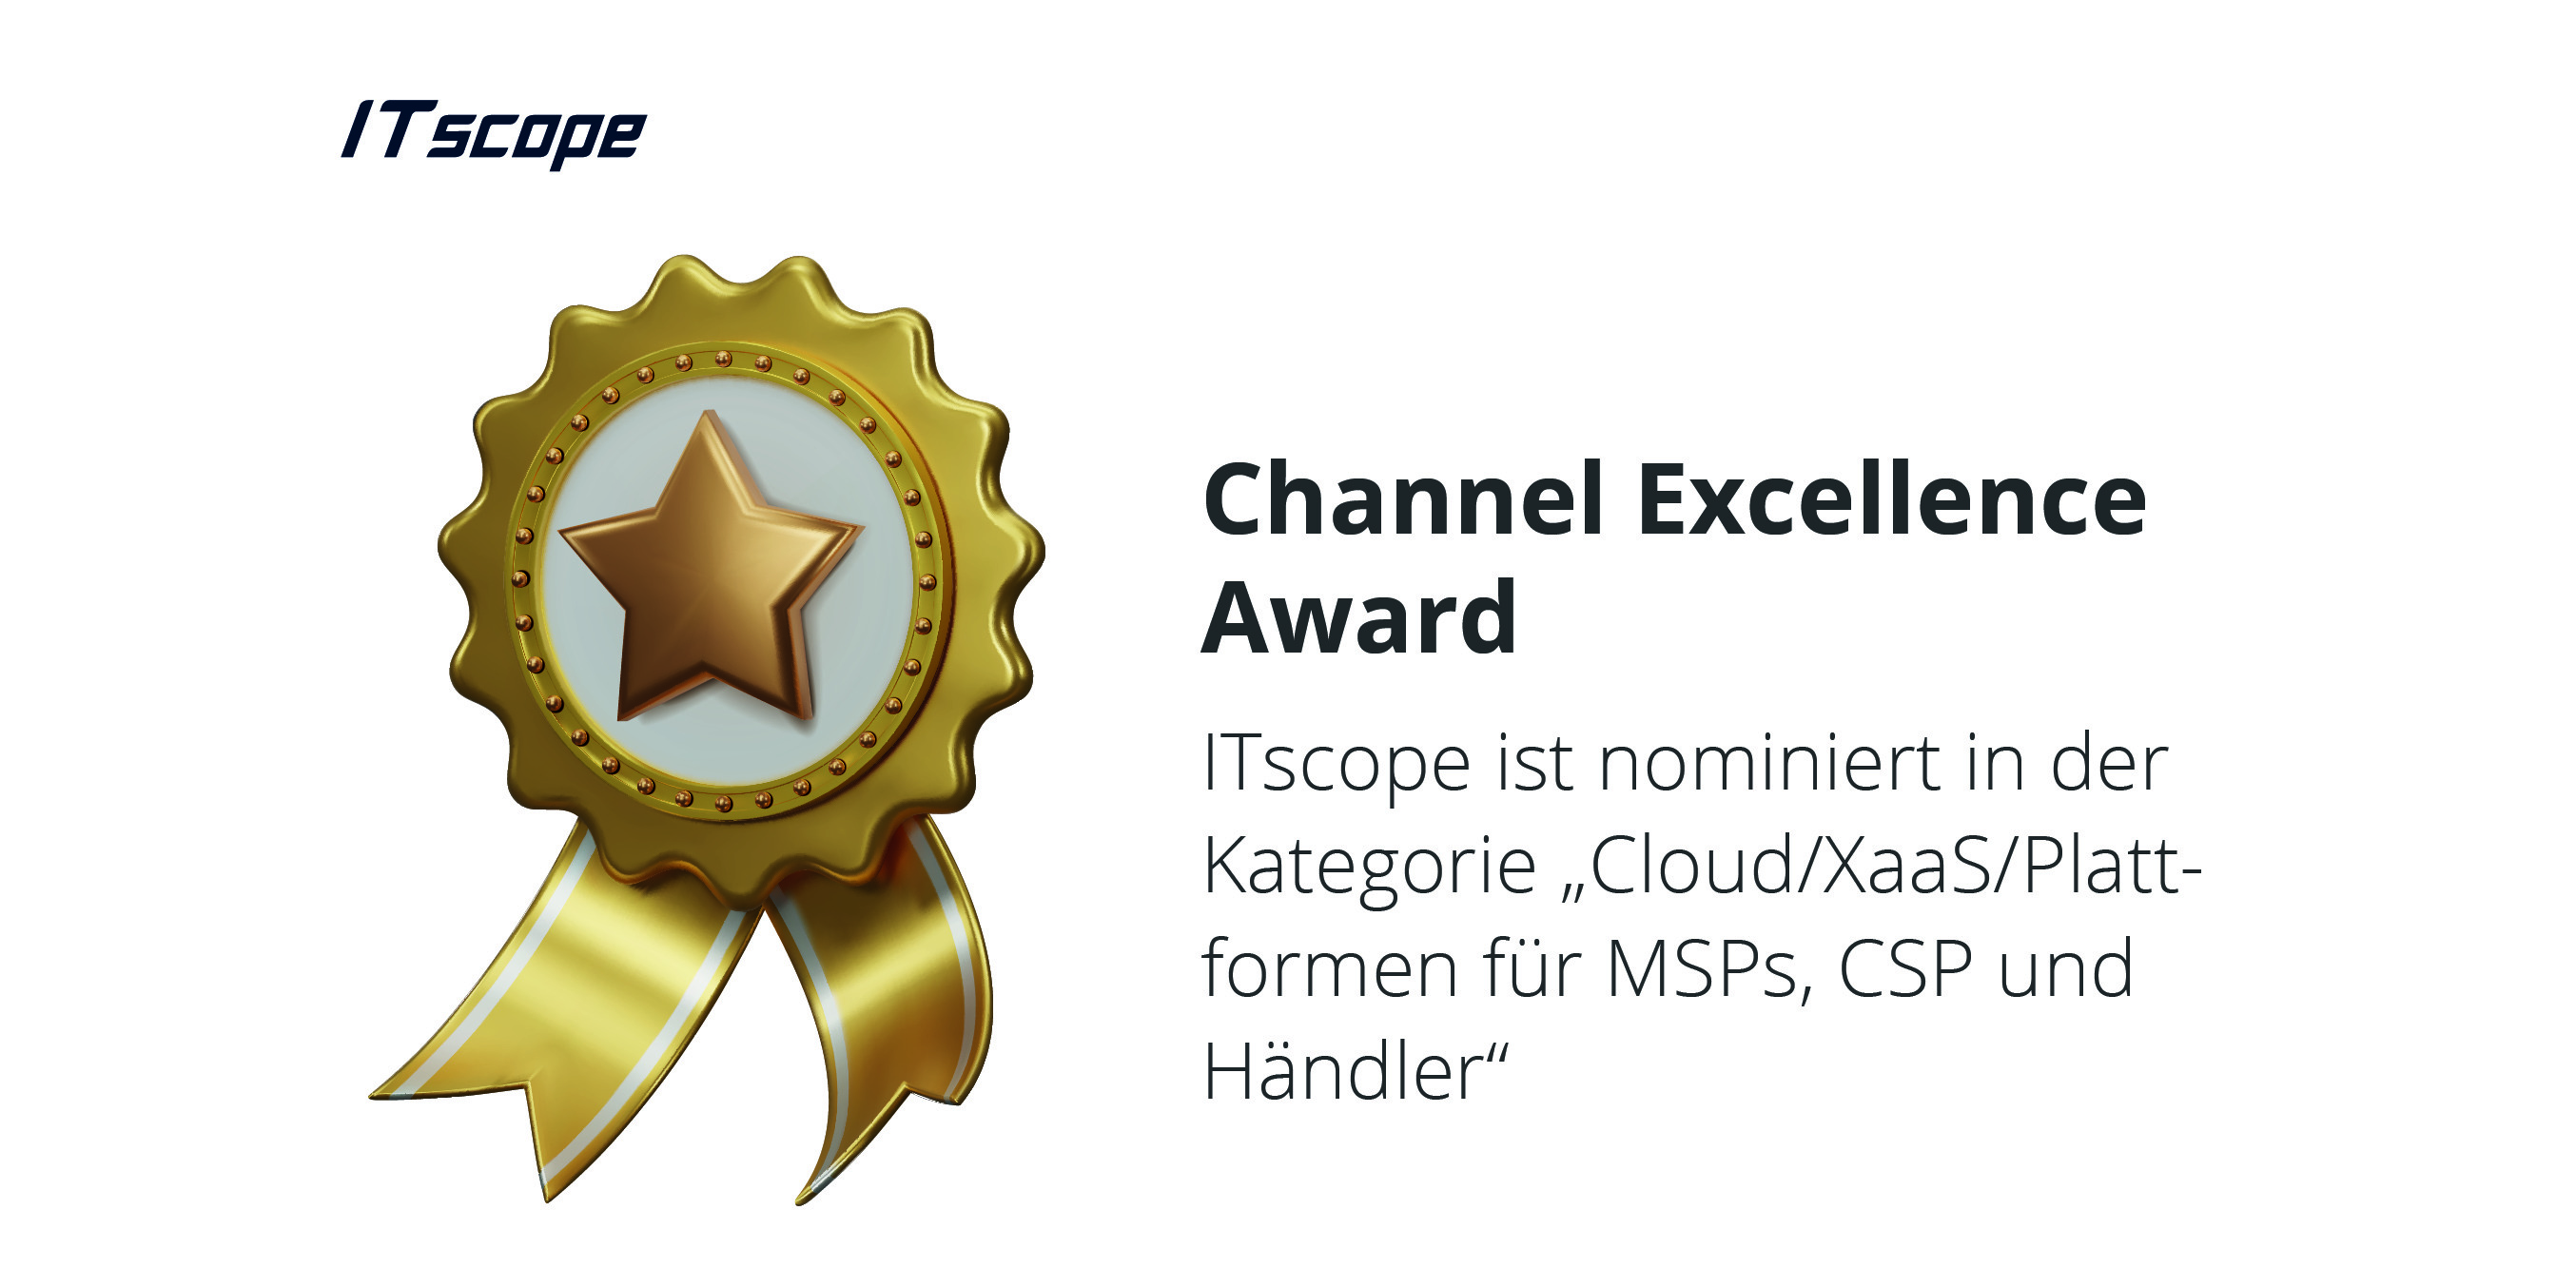 Channel Excellence Awards 2025: ITscope ist nominiert